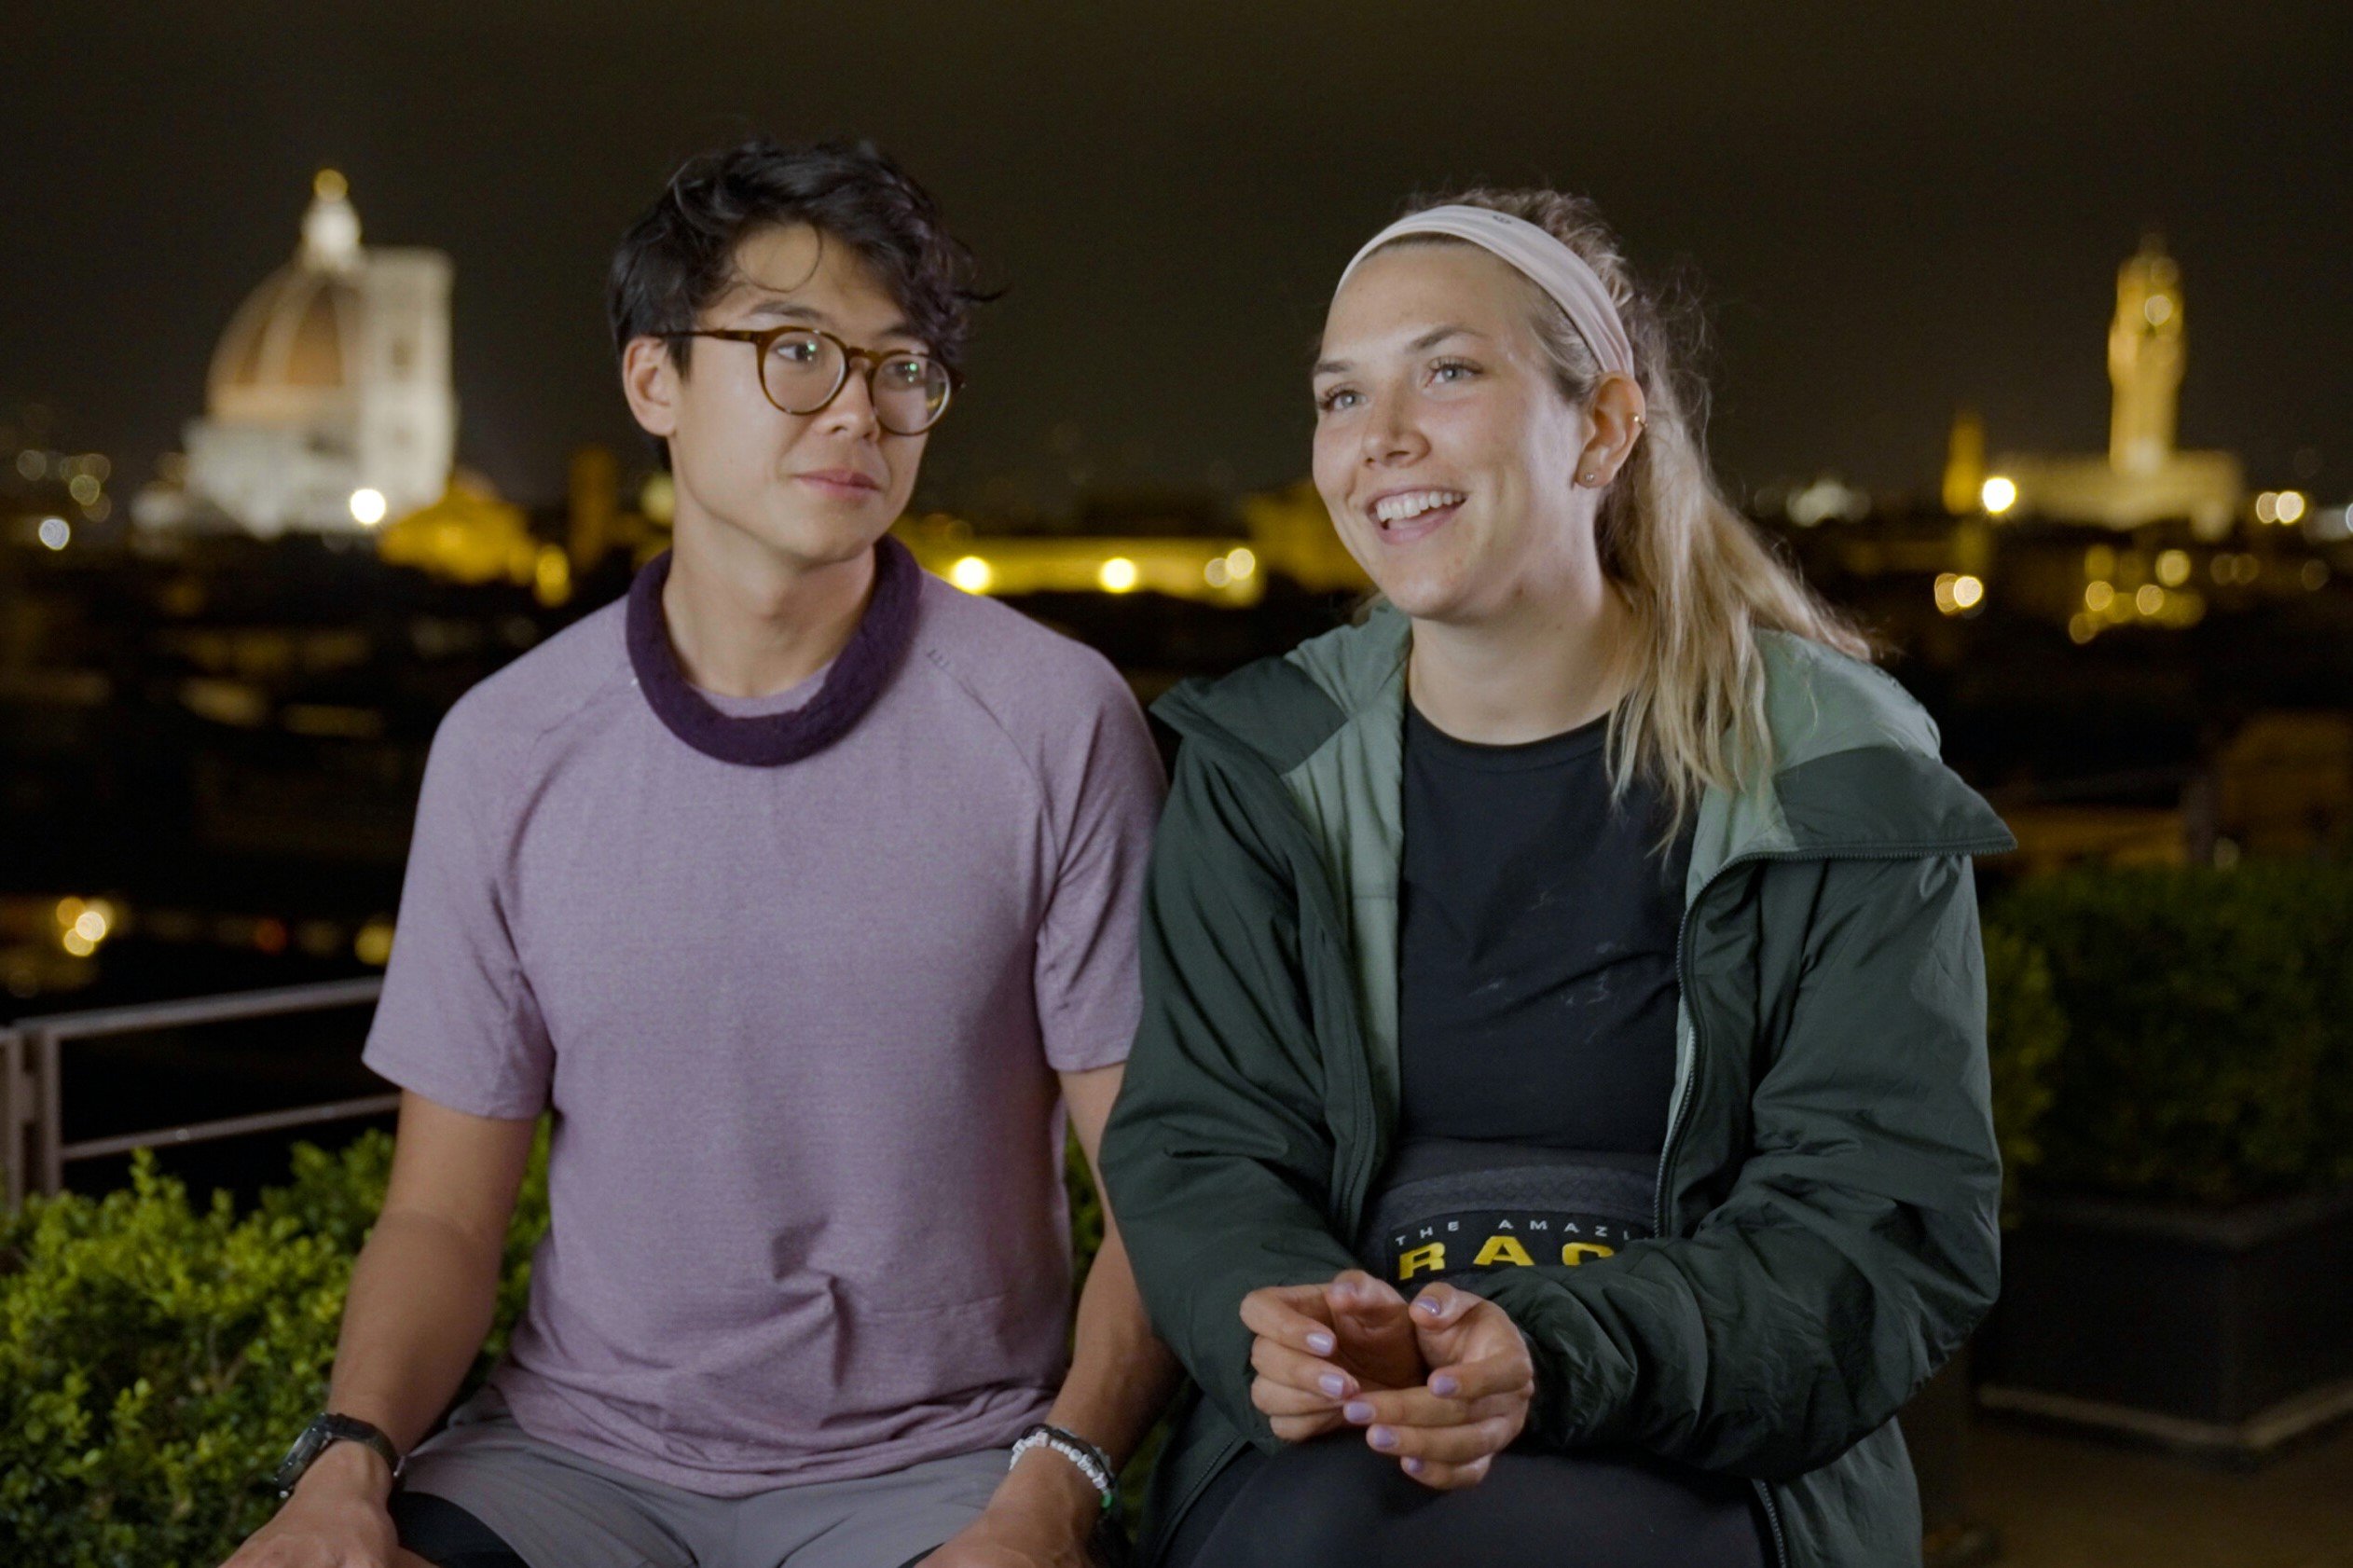 Derek Xiao and Claire Rehfuss, who star in 'The Amazing Race' Season 34 on CBS,